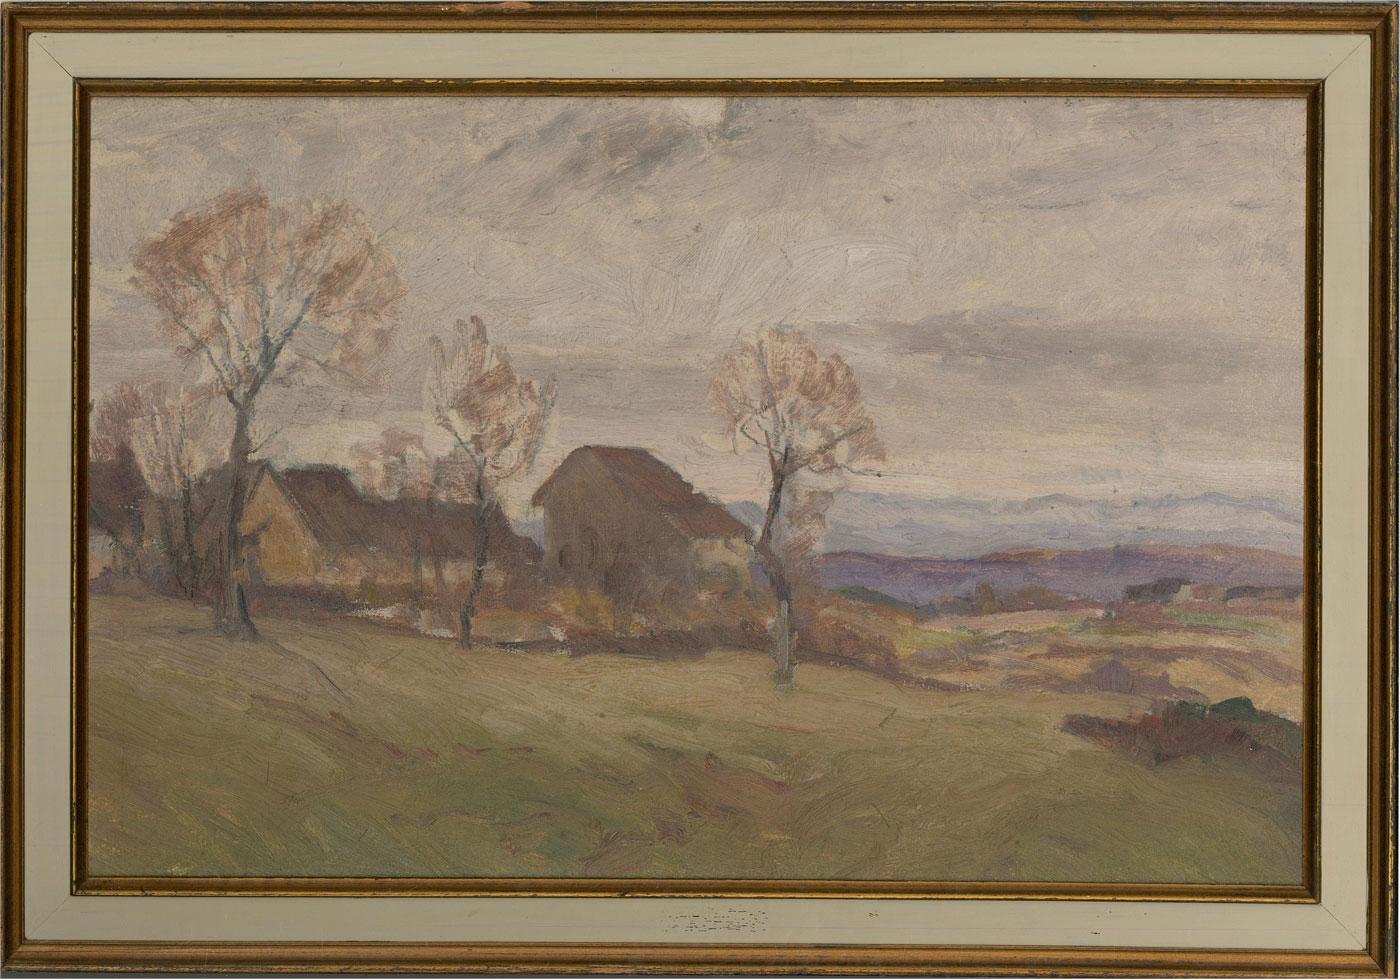 A captivating oil painting, depicting a rural landscape scene with cottages. Unsigned. Presented in an off-white wooden frame with inner and outer gilt details, as shown. On board.